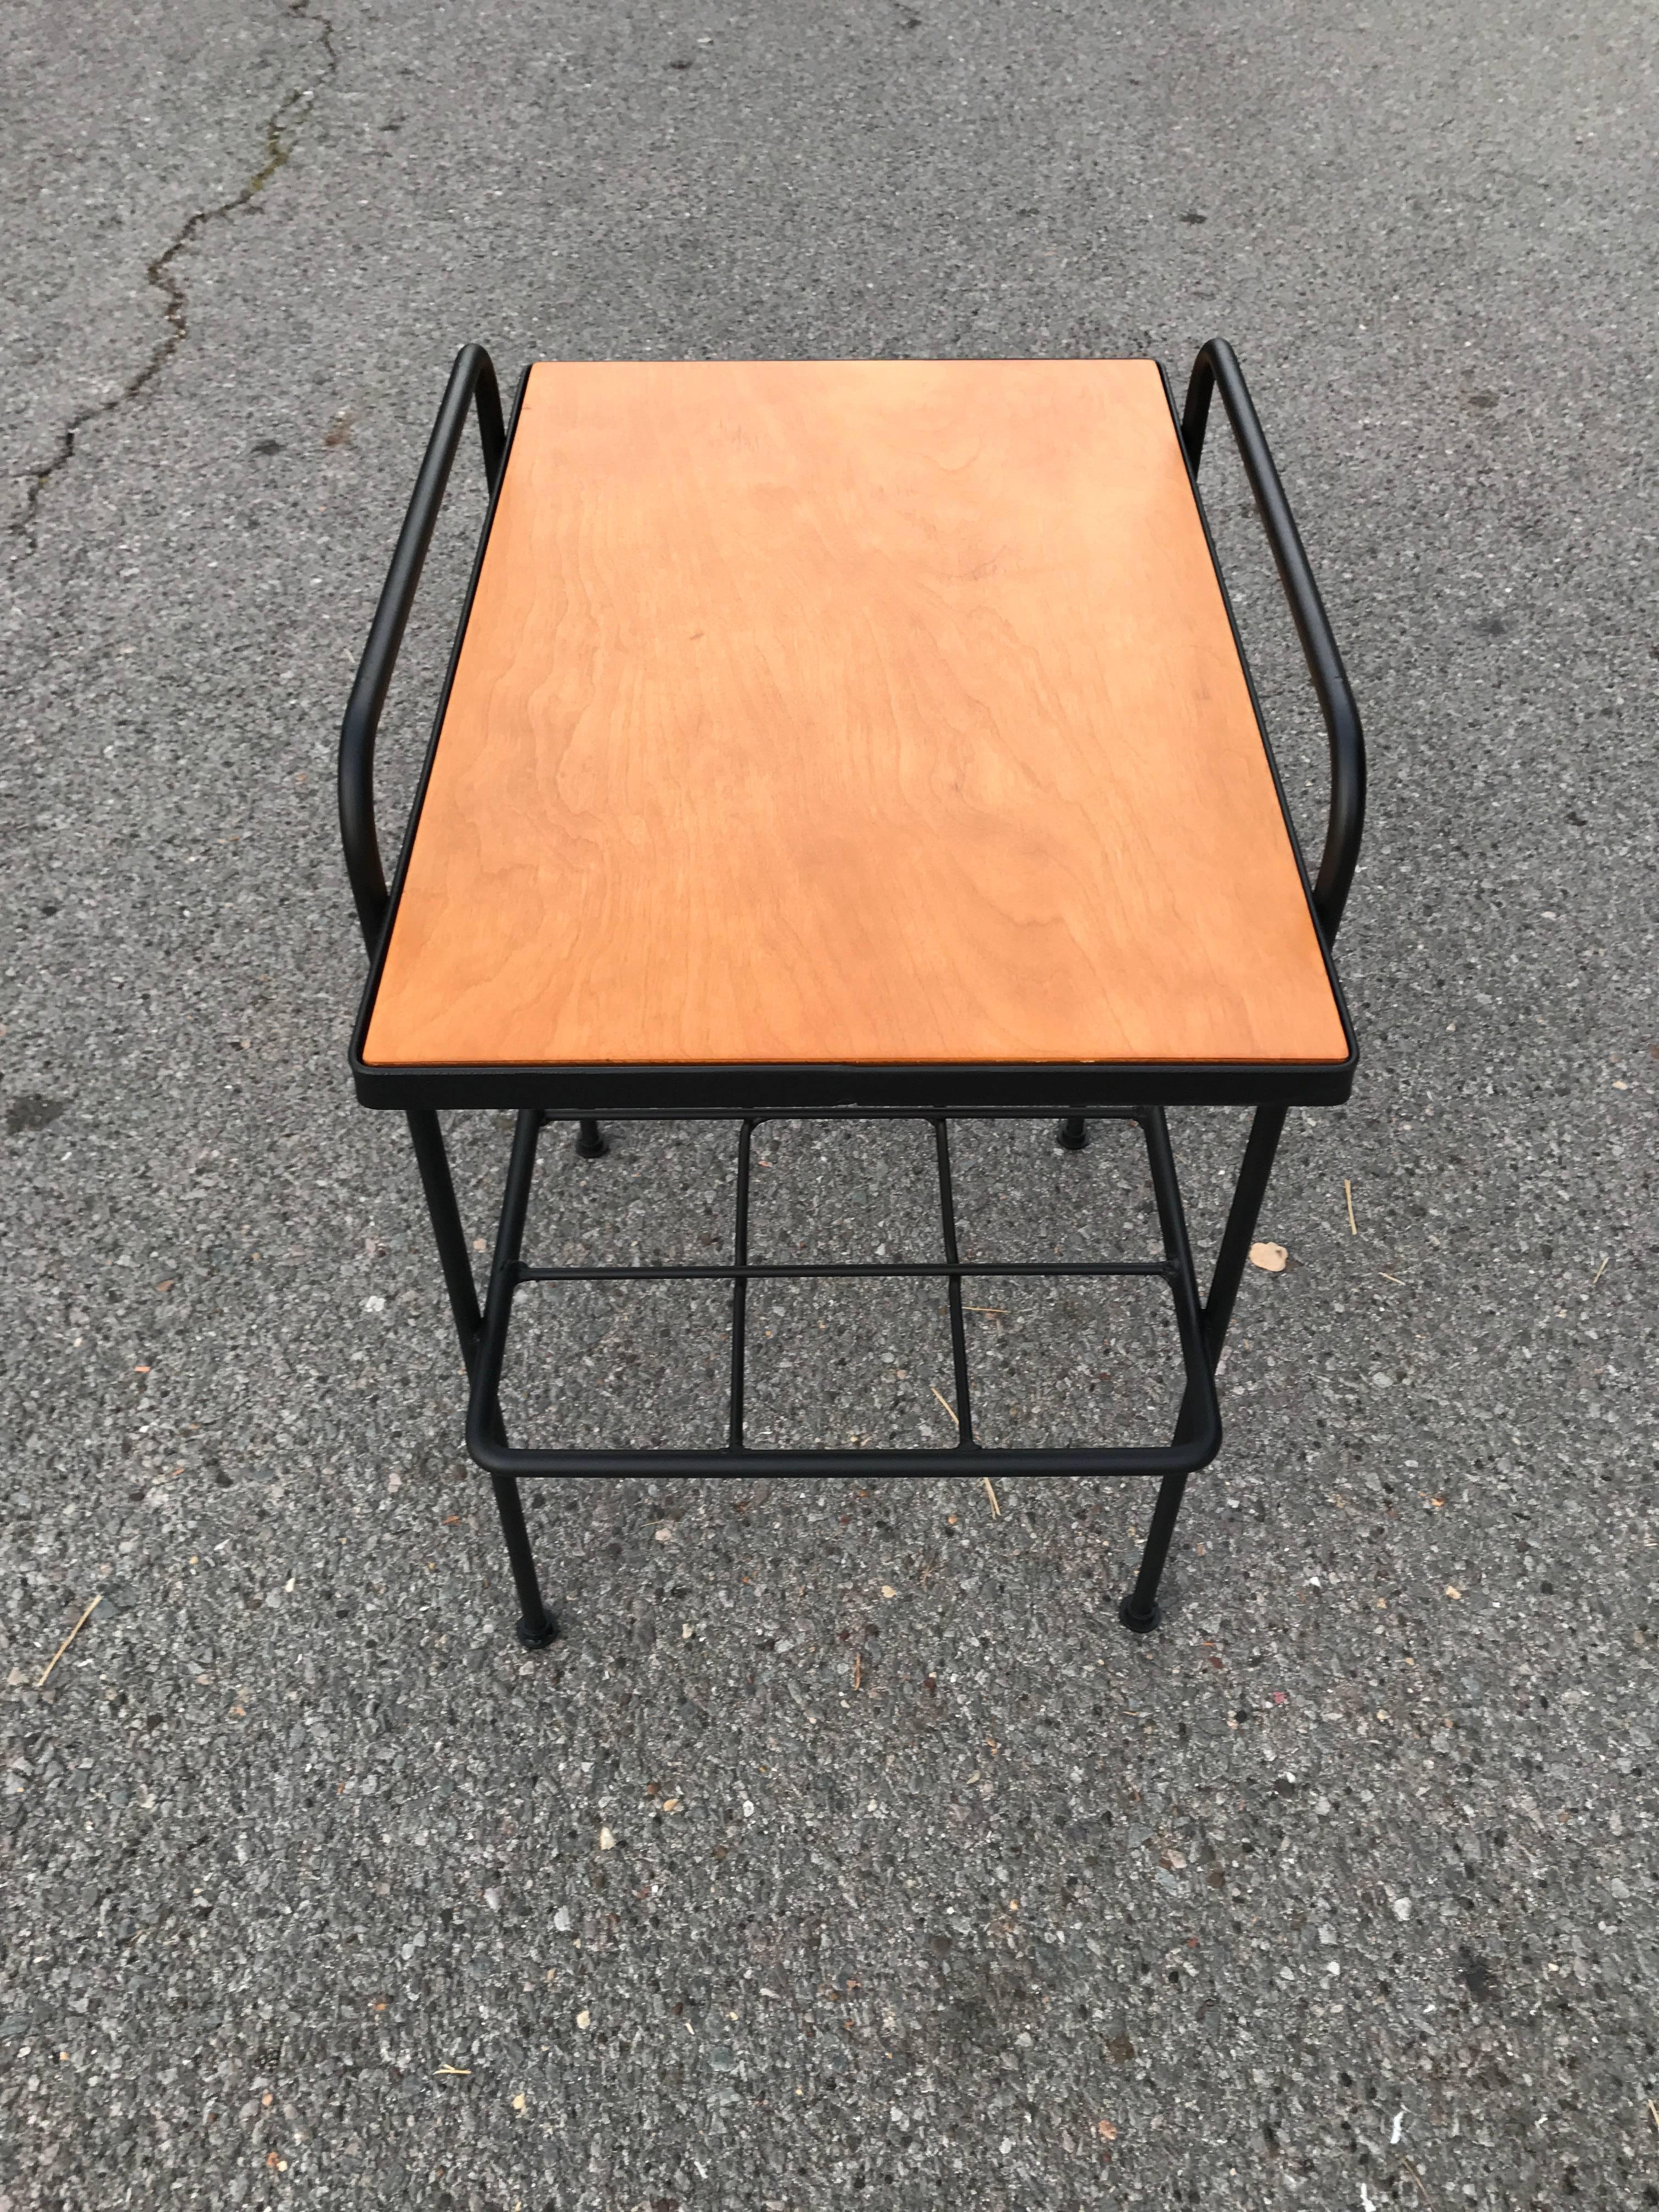 Inco Iron and Birch Side Table 1950s, California Design In Good Condition For Sale In San Francisco, CA